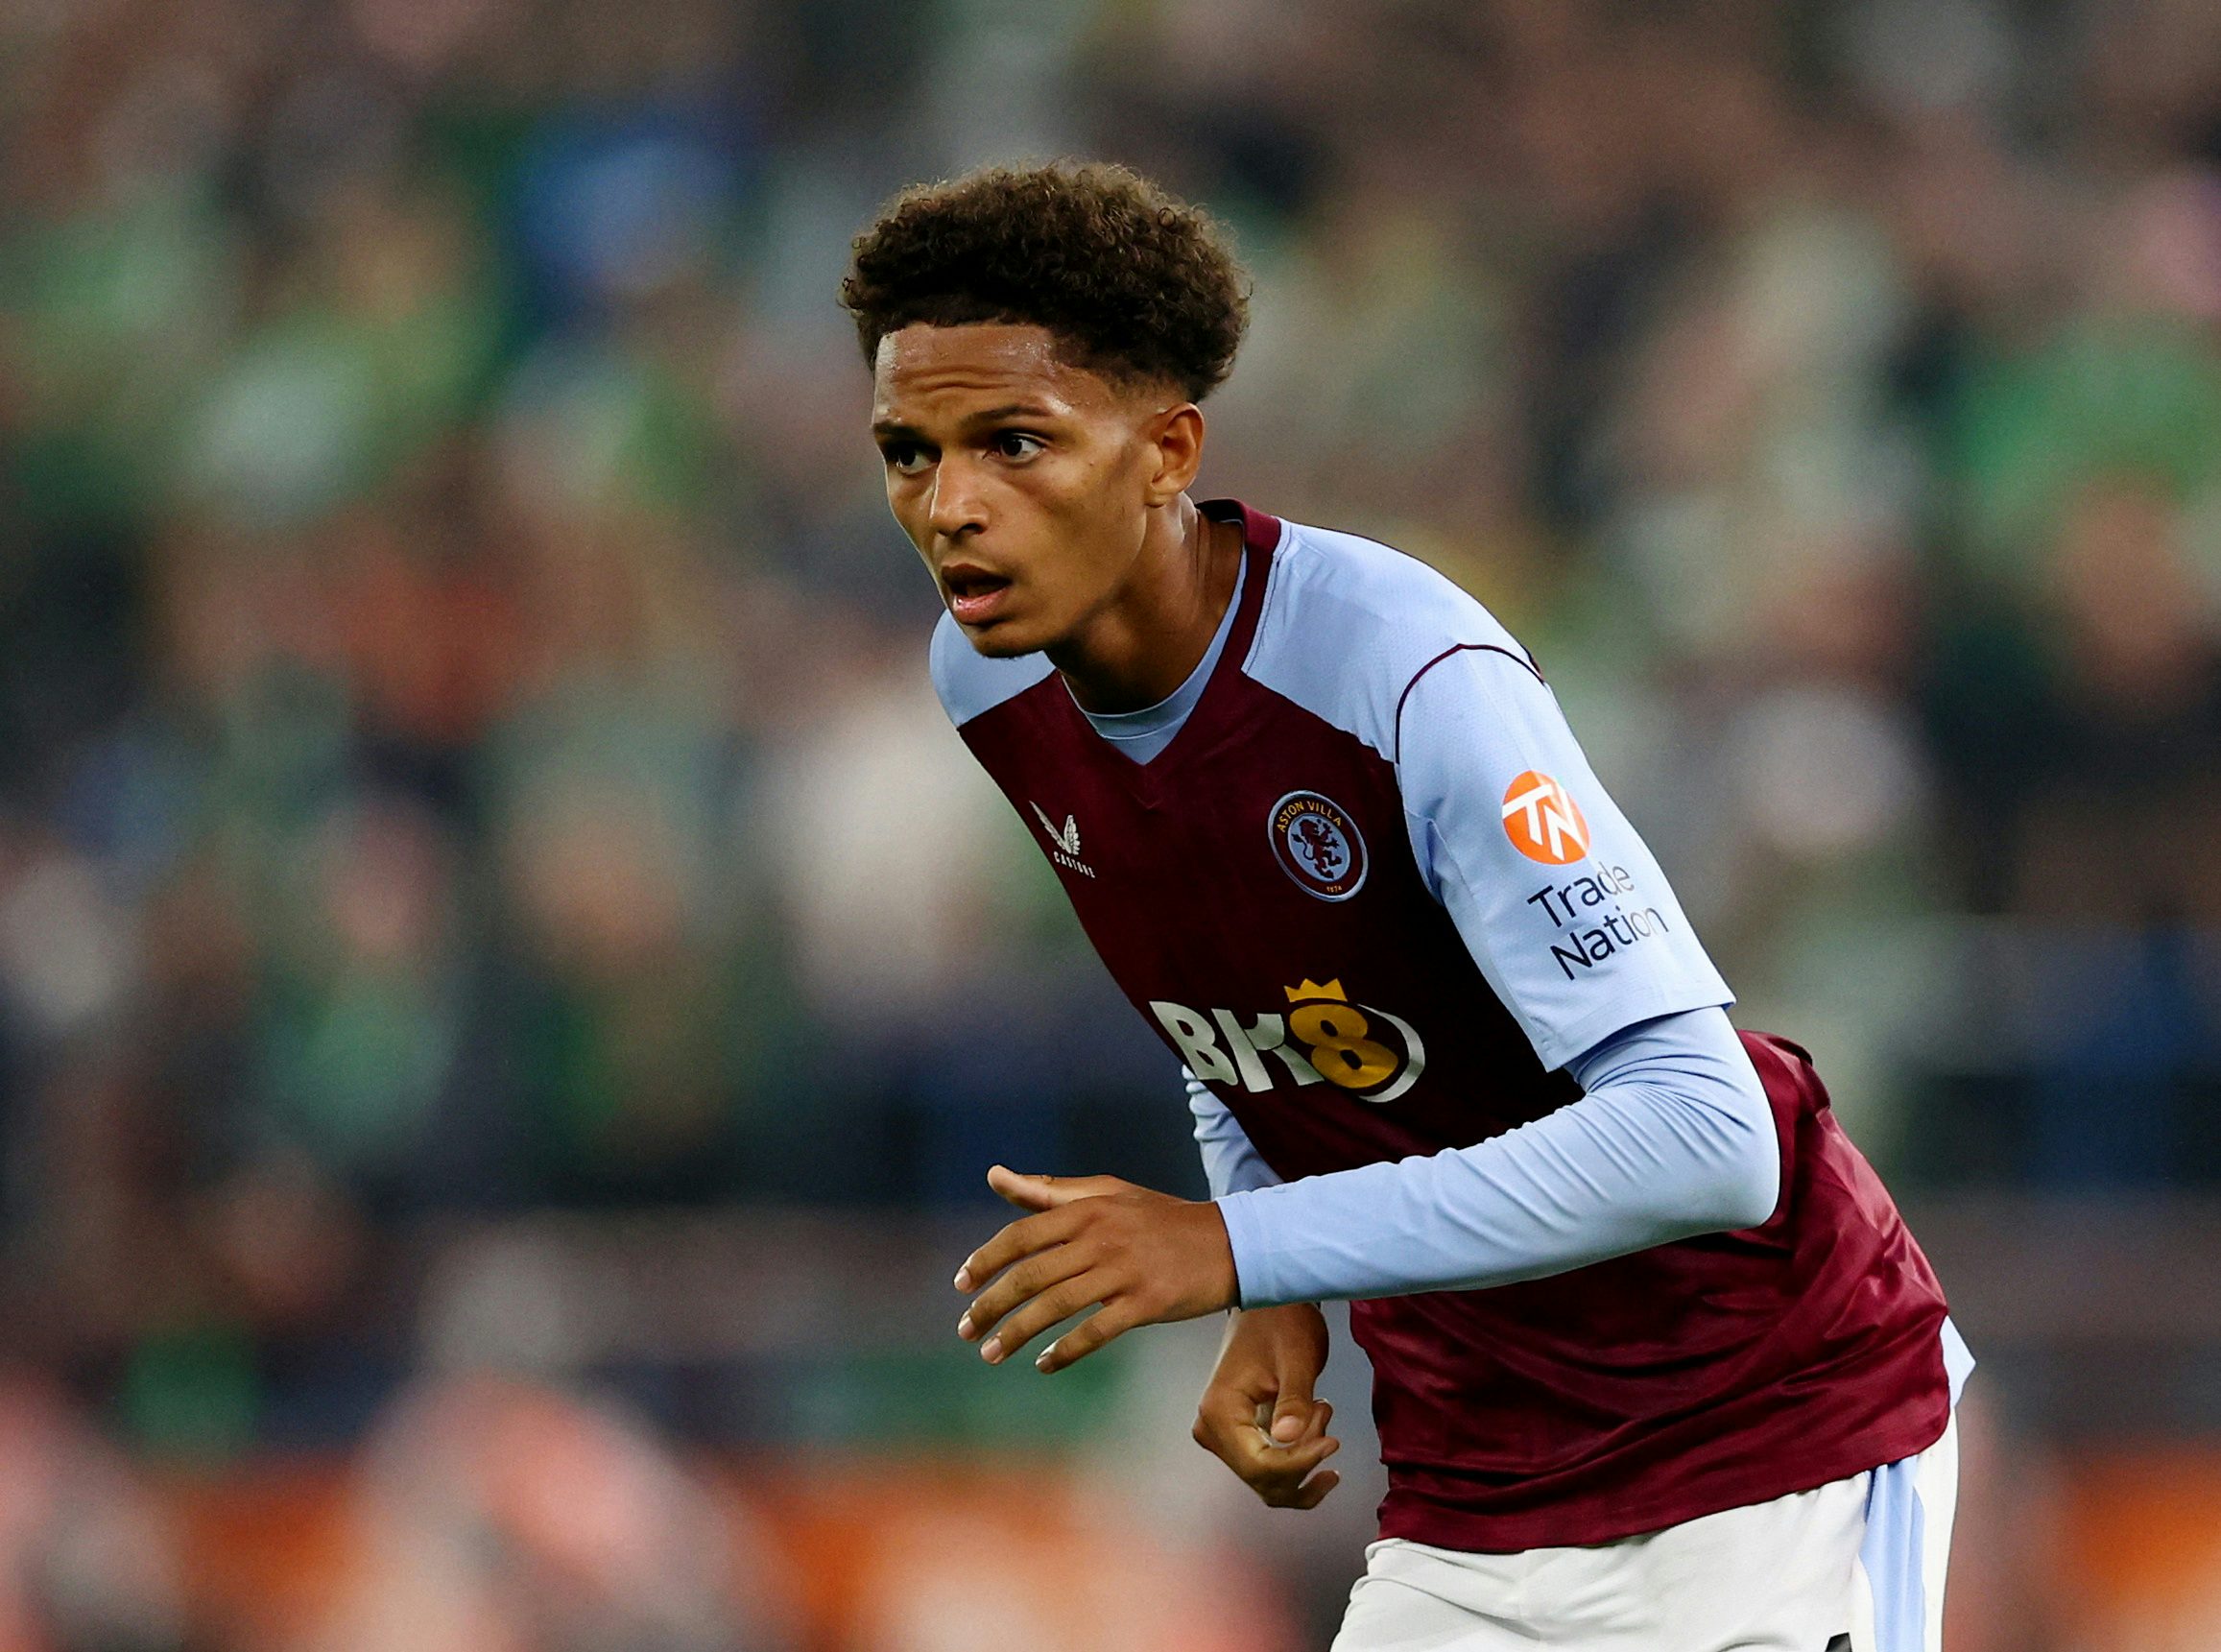 Chelsea transfer news: Chelsea complete signing of Aston Villa youngster 